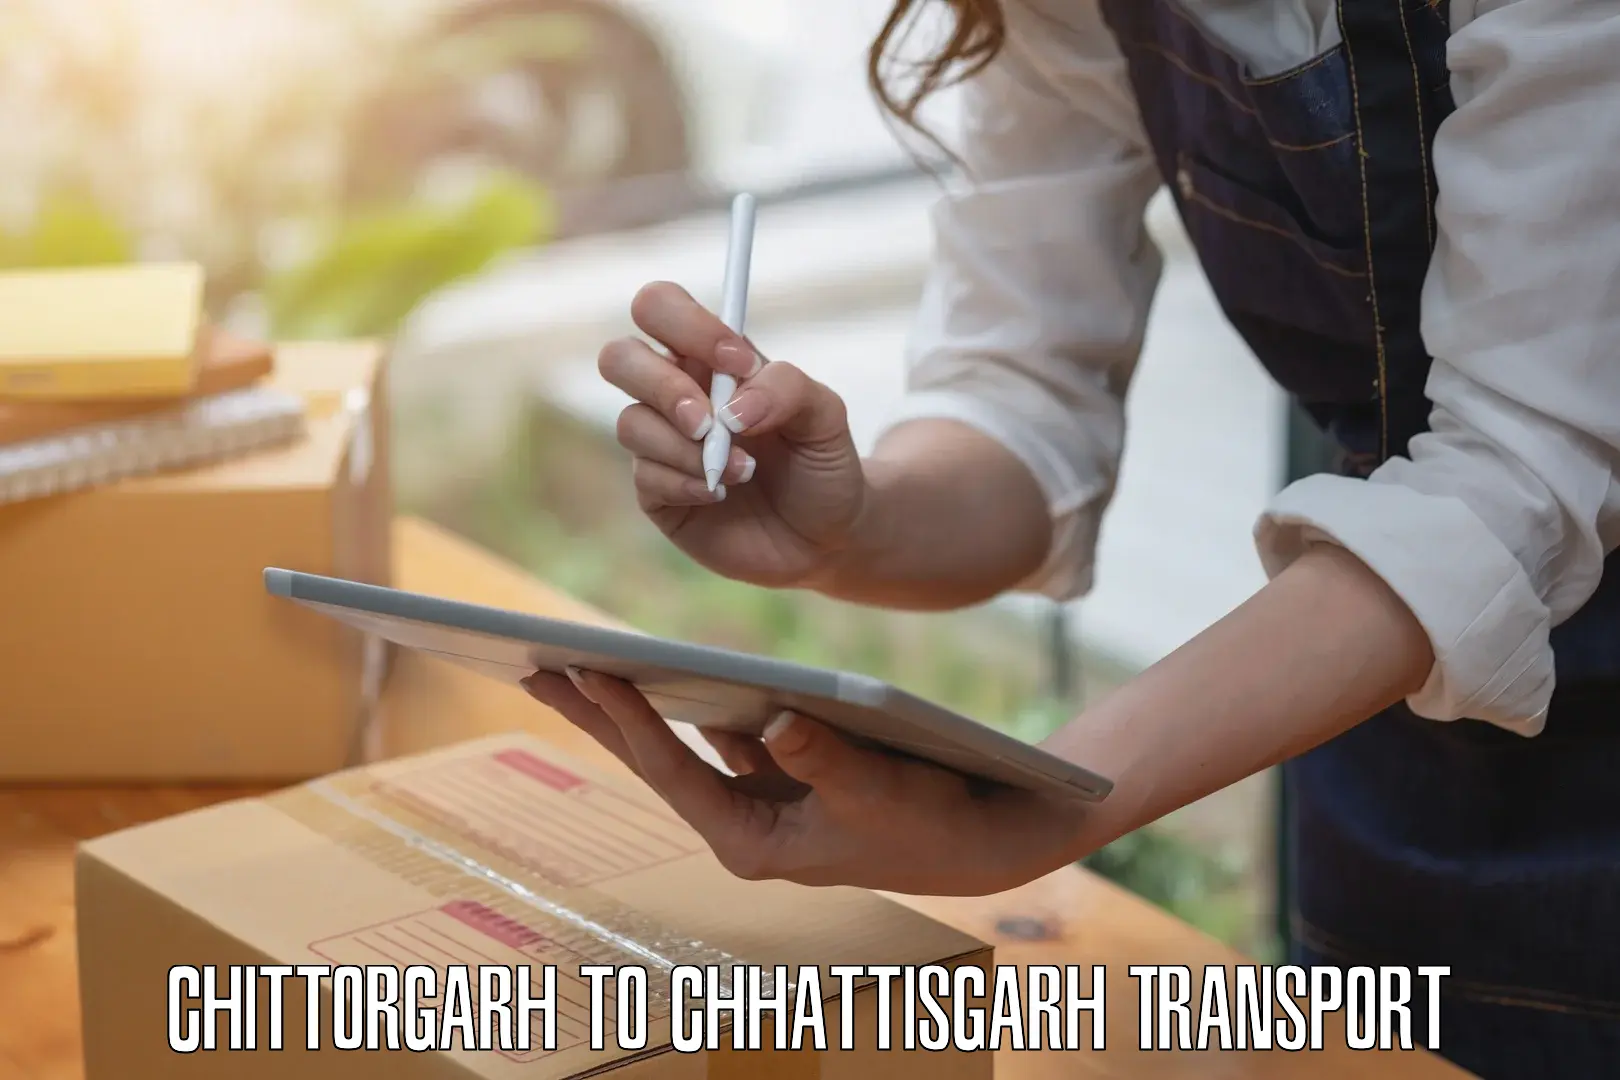 Delivery service Chittorgarh to NIT Raipur